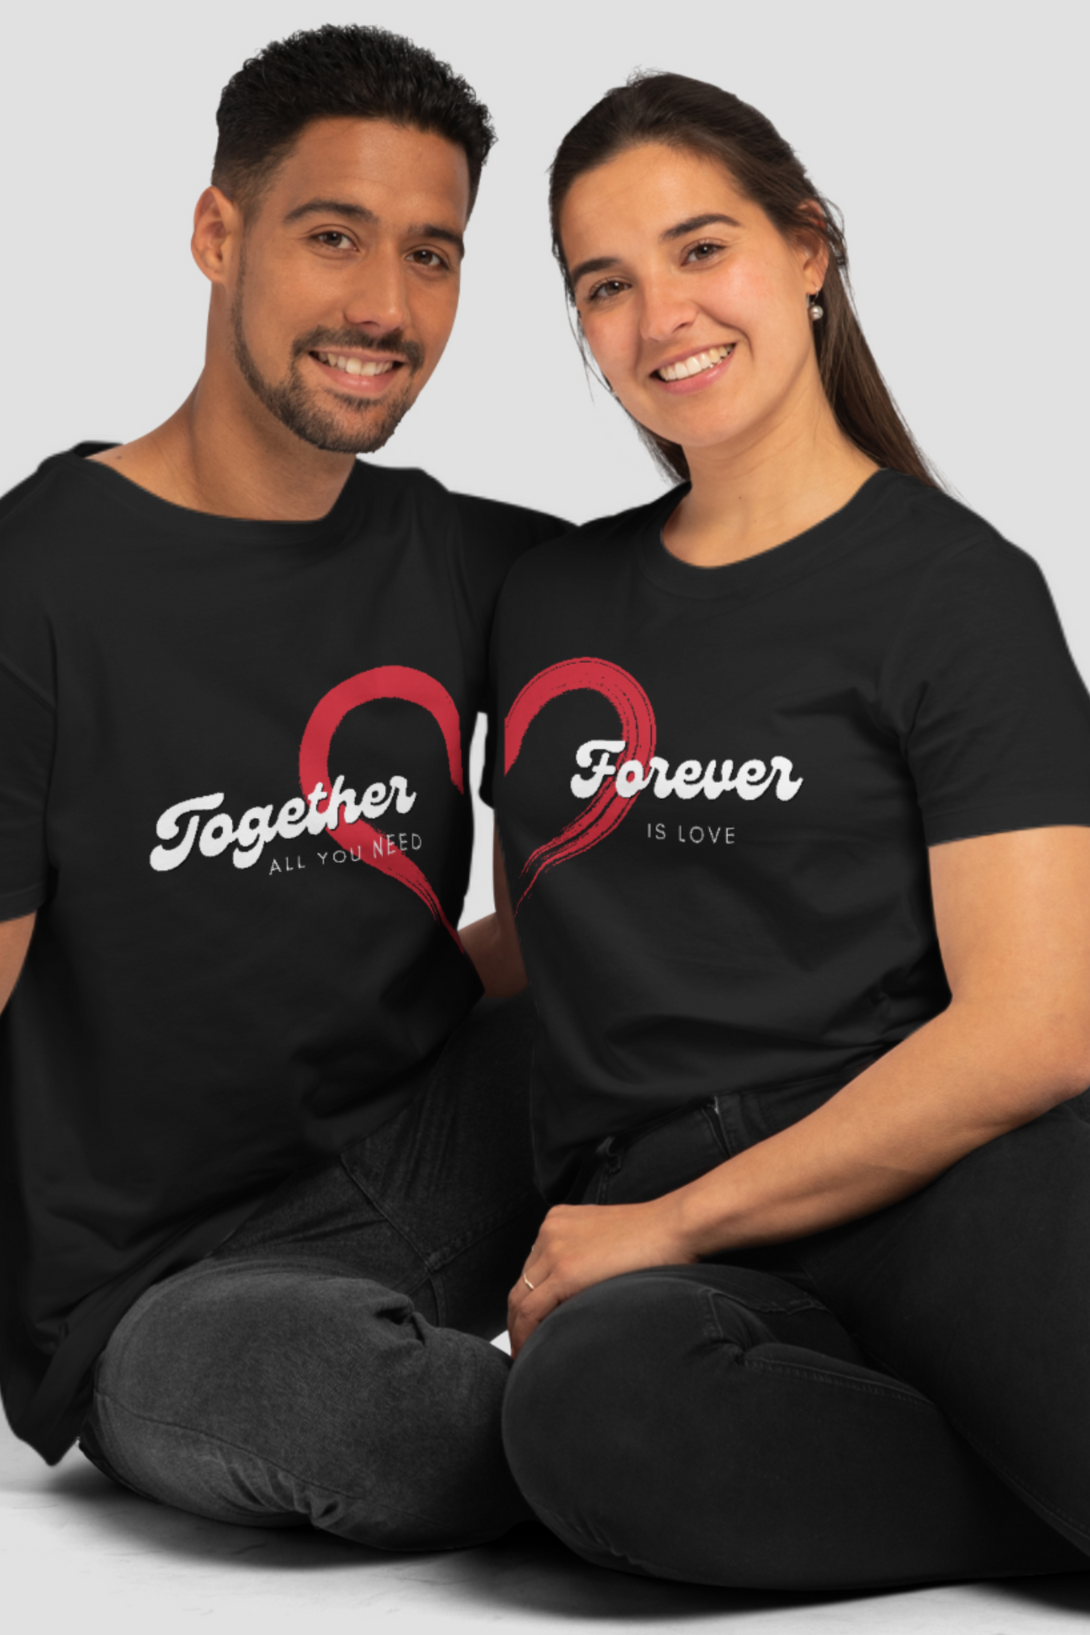 Together Forever Couple T Shirt - WowWaves - 2